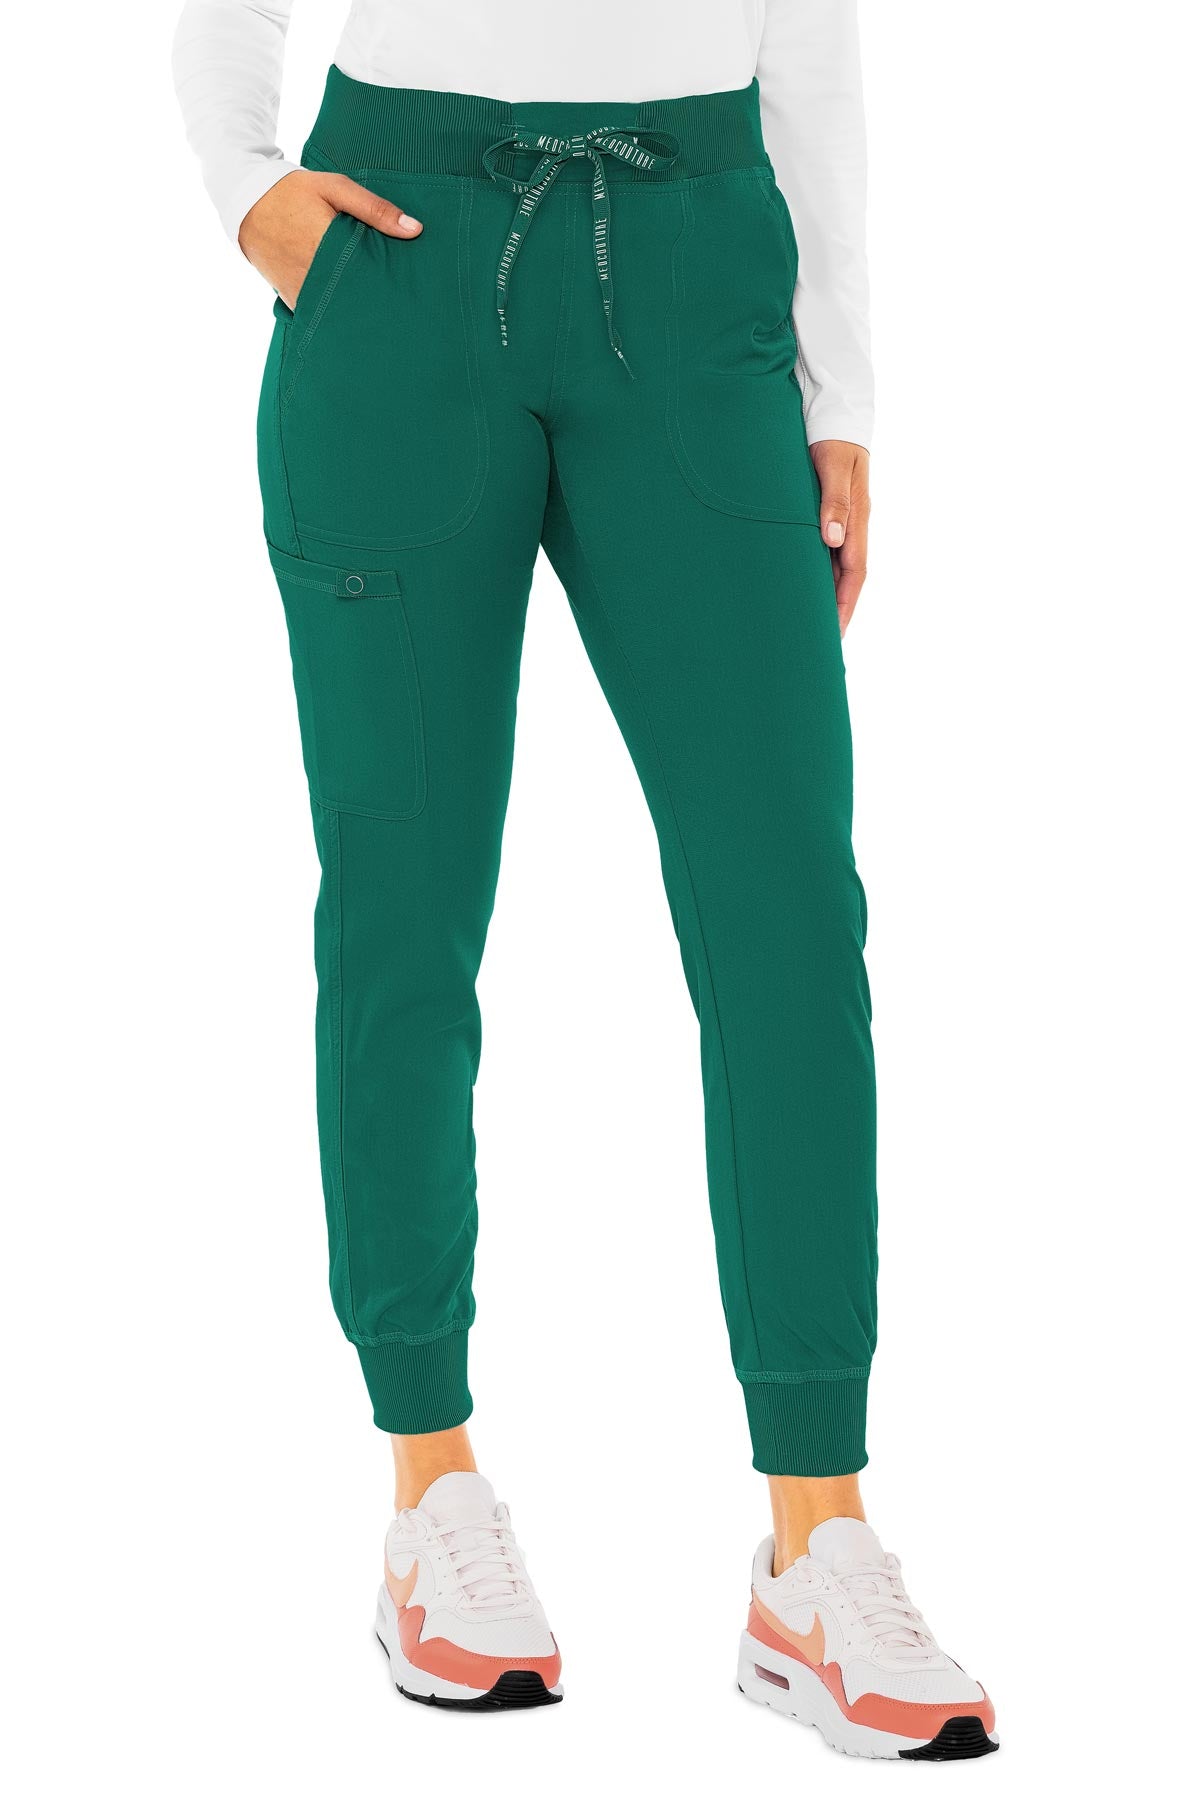 Med Couture Hunter PANT